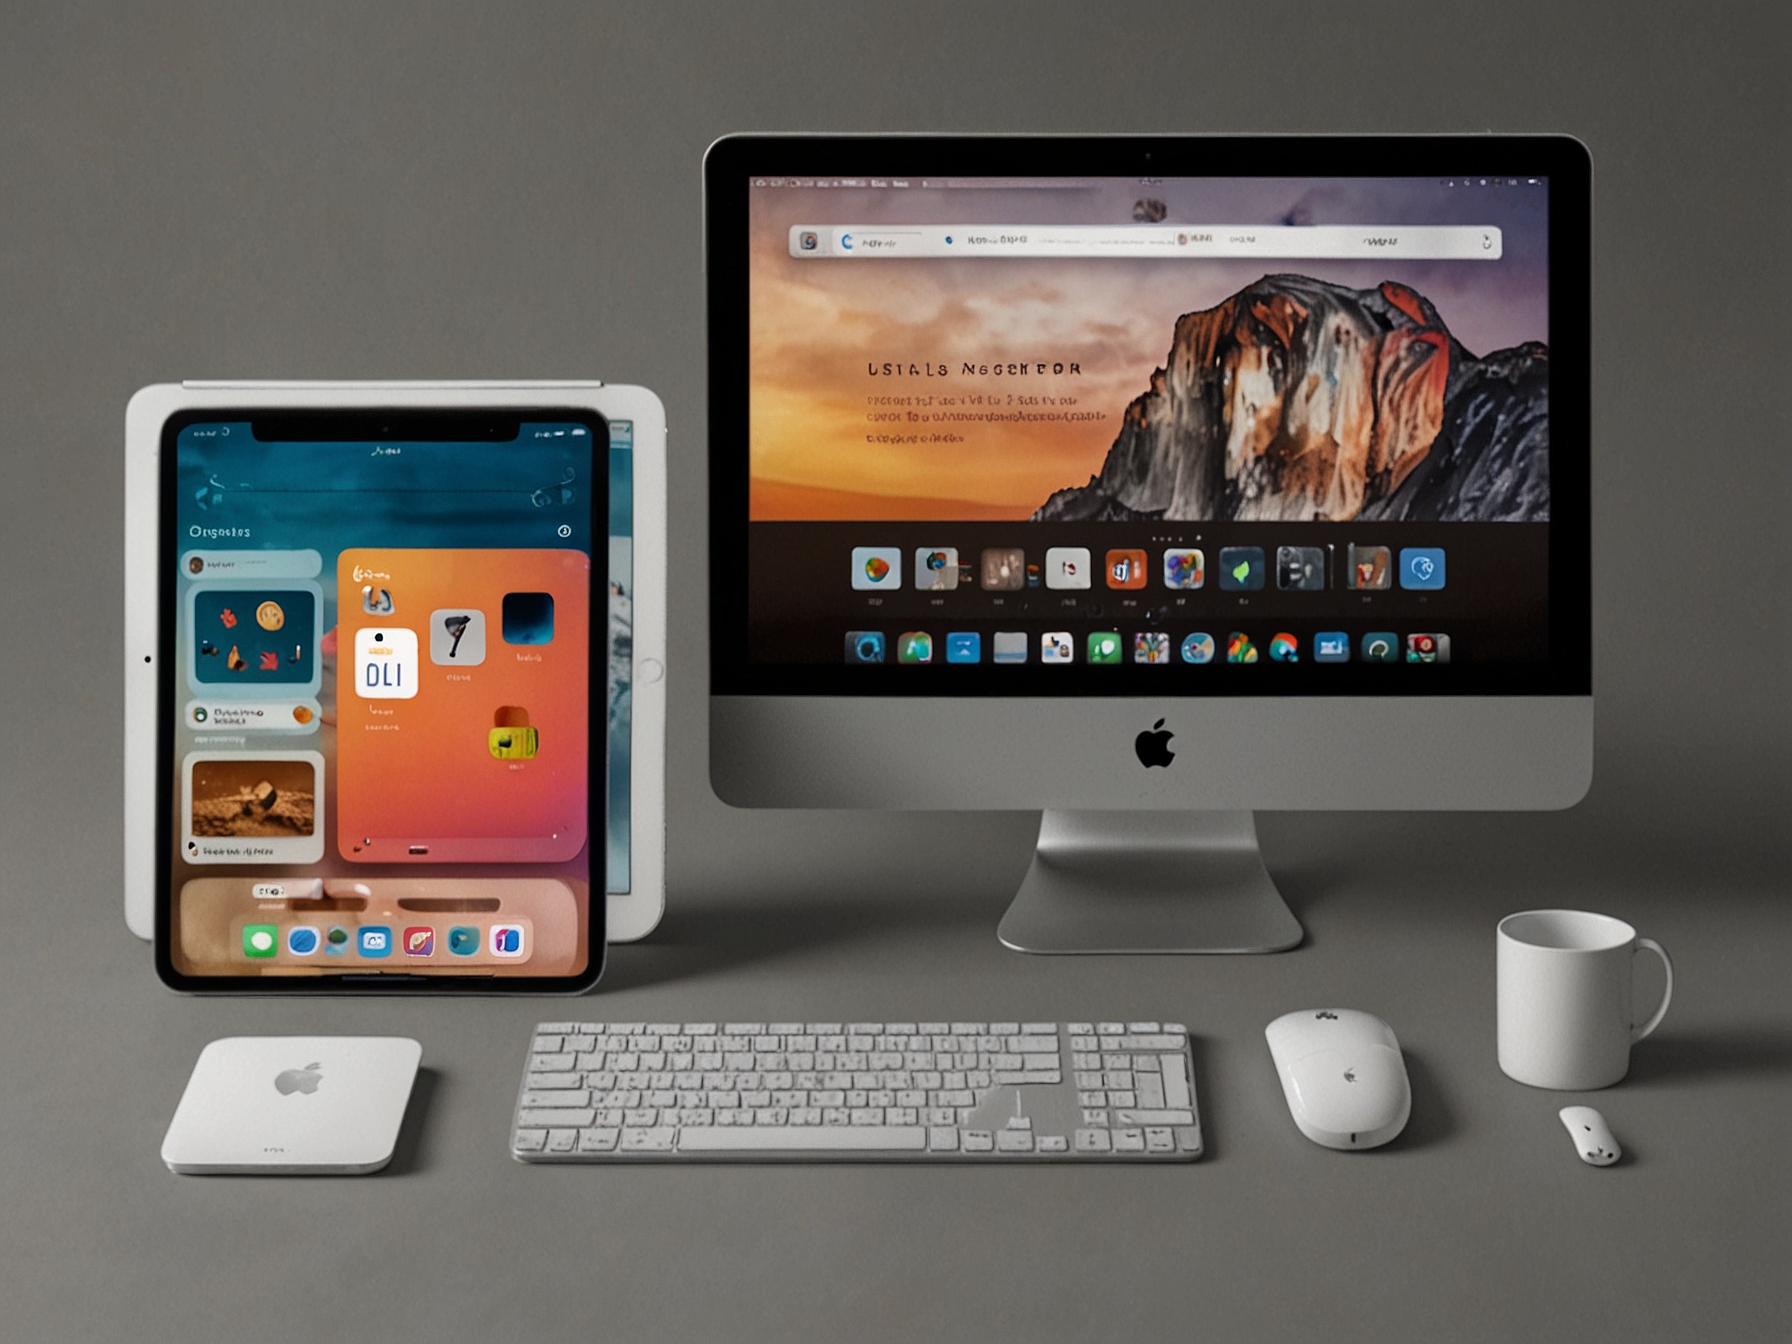 Multiple Apple devices like iPhones, iPads, and Macs demonstrate seamless integration of AI technology, showcasing the versatility and user-centric design of Apple's foundation models.